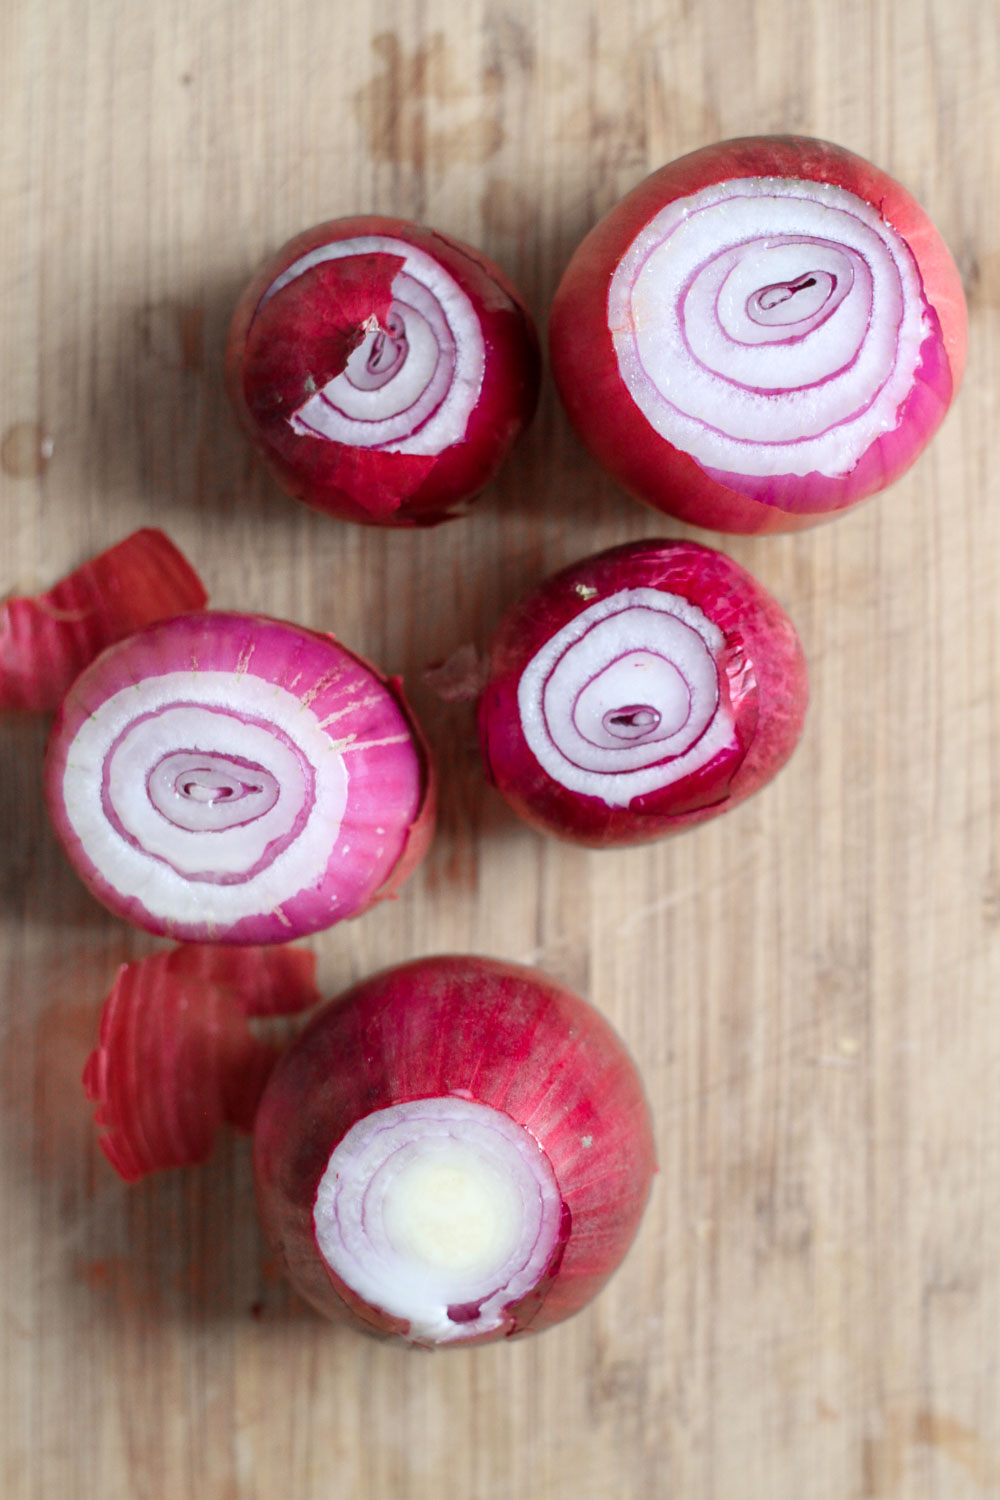 Red onions (Eat Me. Drink Me.)